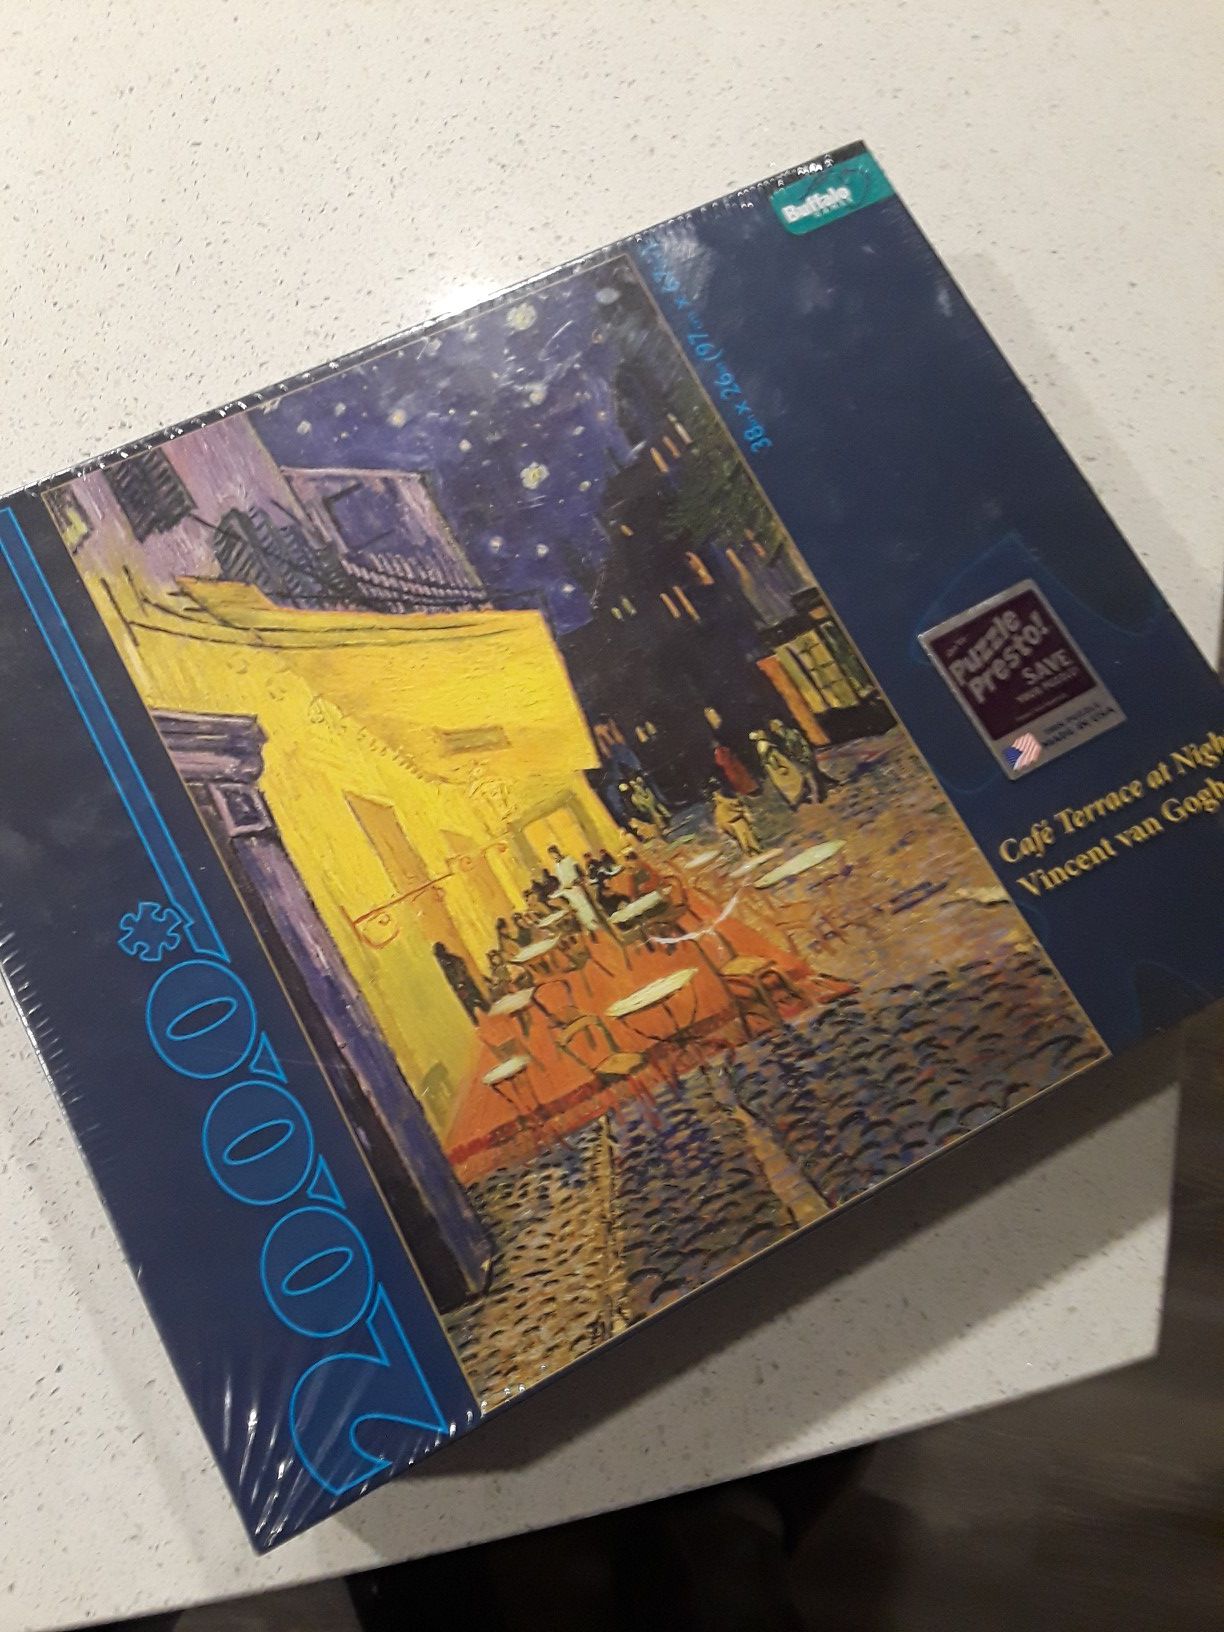 Vincent Van Gogh Cafe Terrace At Night 2000 Piece Jigsaw Puzzle by Buffalo Games